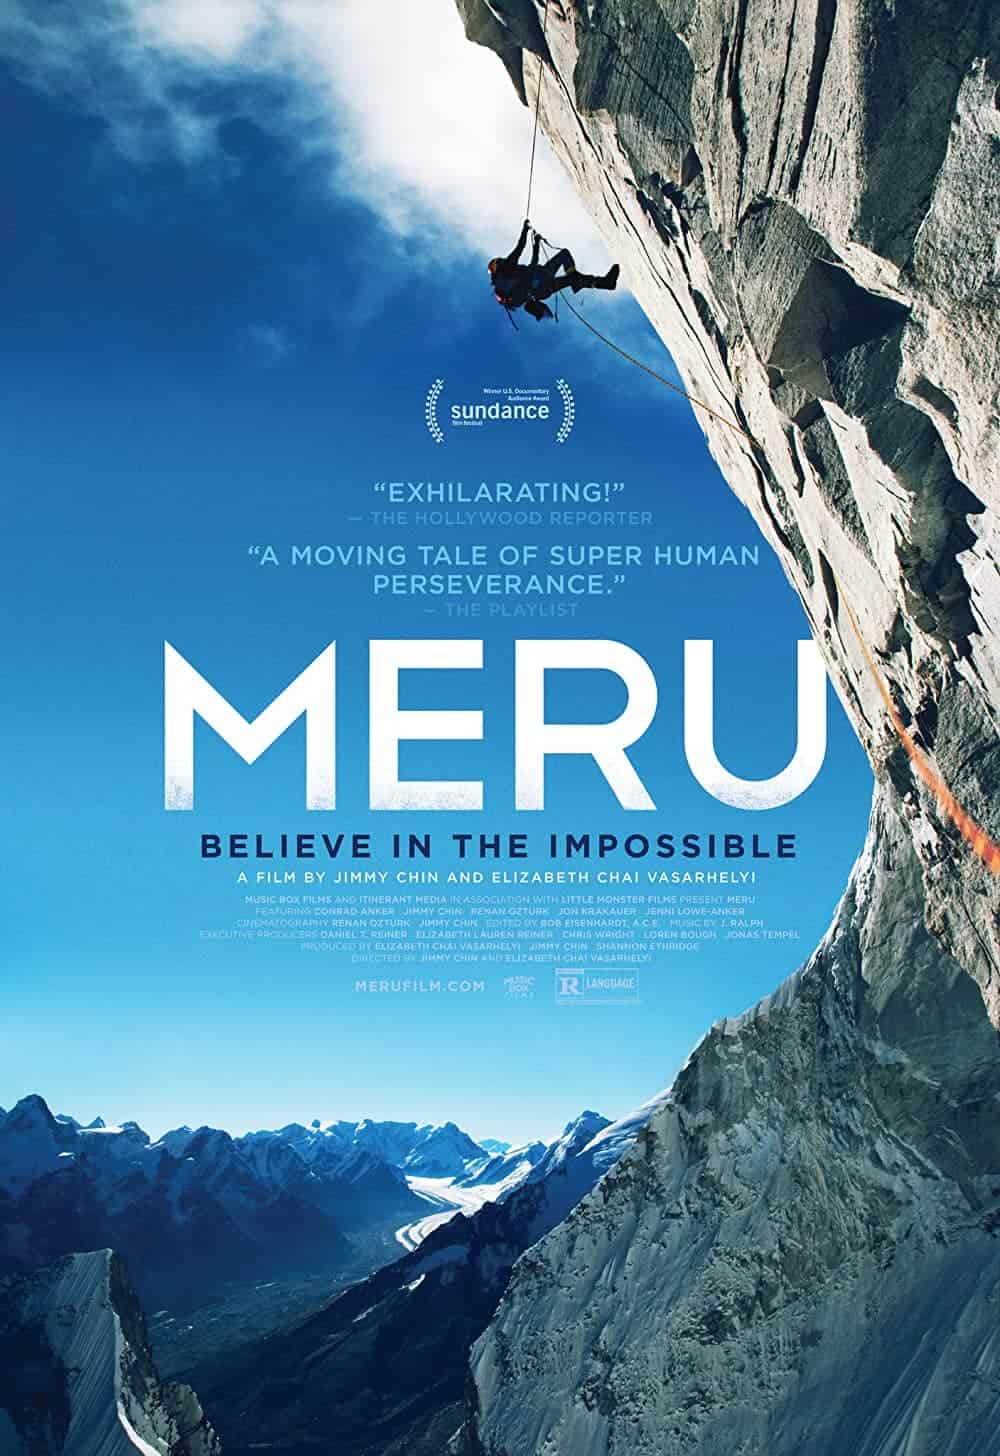 Meru (2015) Best Mountaineering Movies You Can't Miss